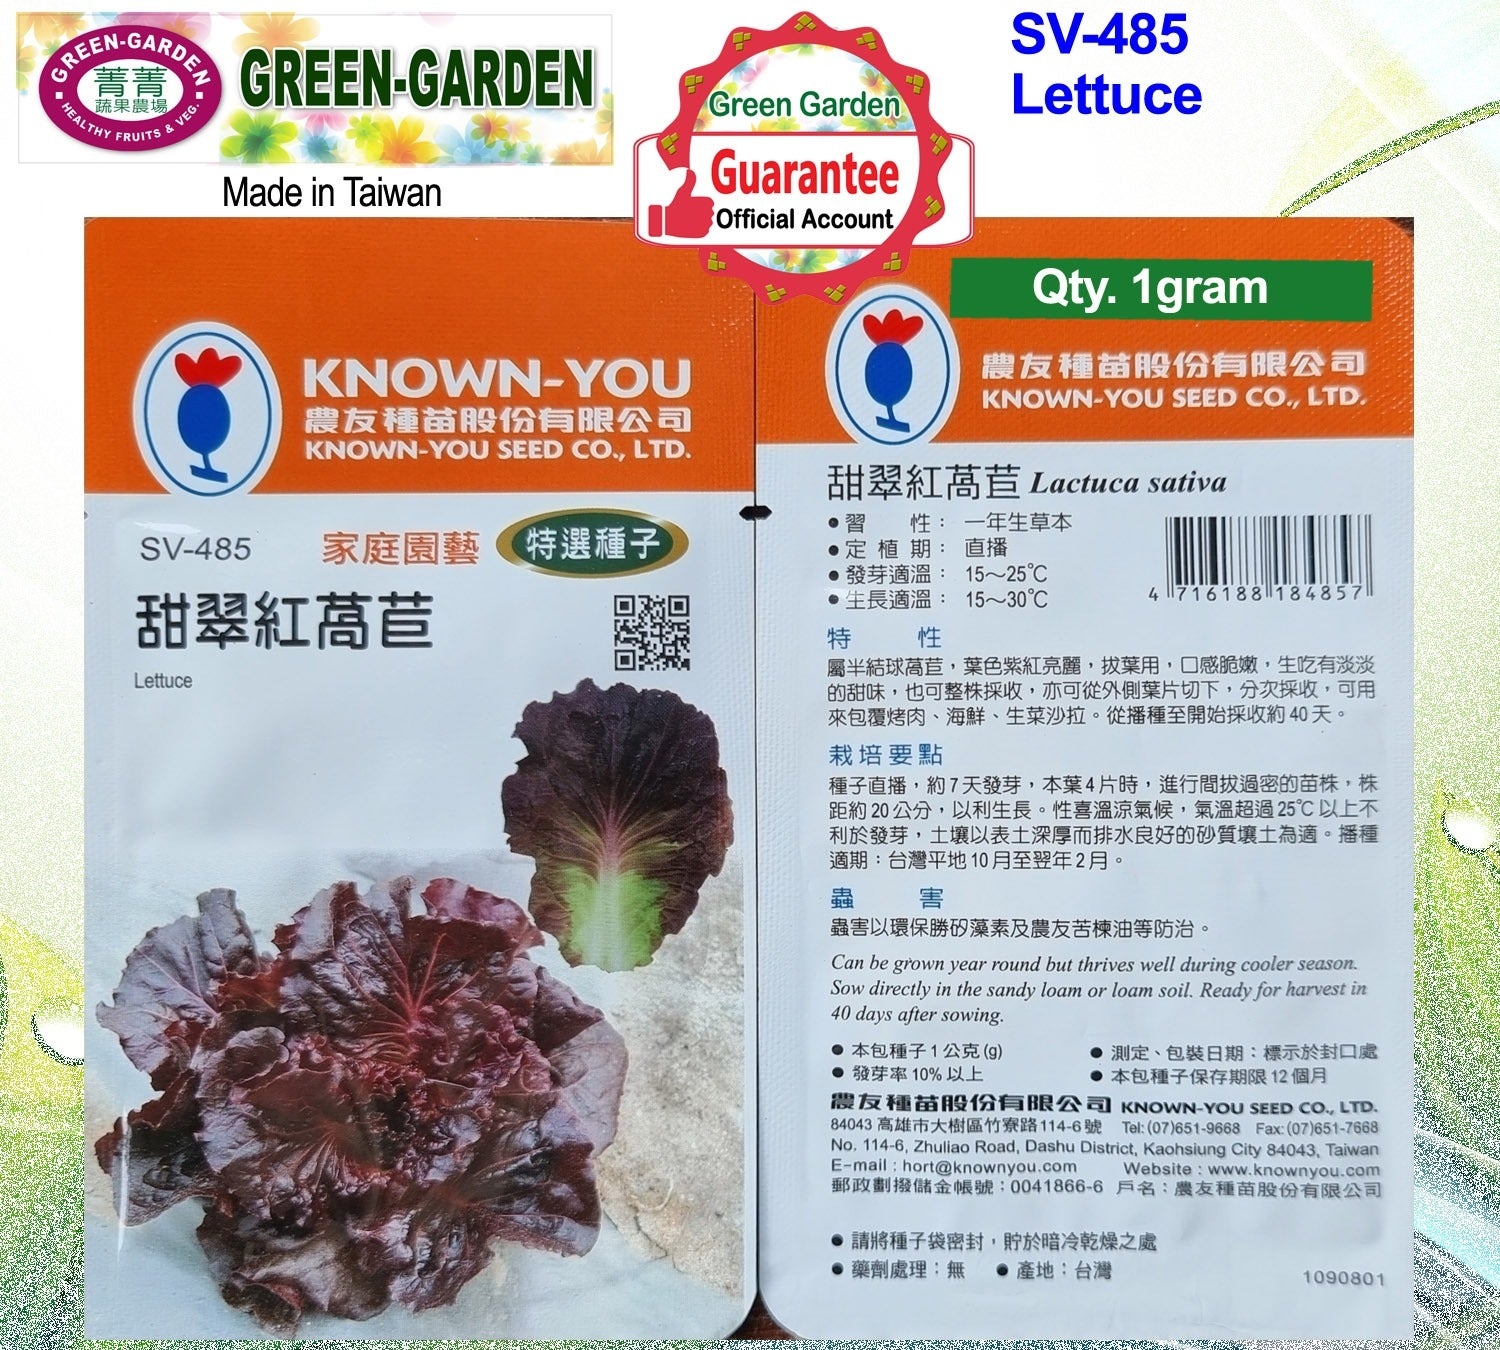 Known You Special Seeds (SV-485 Lettuce (red))